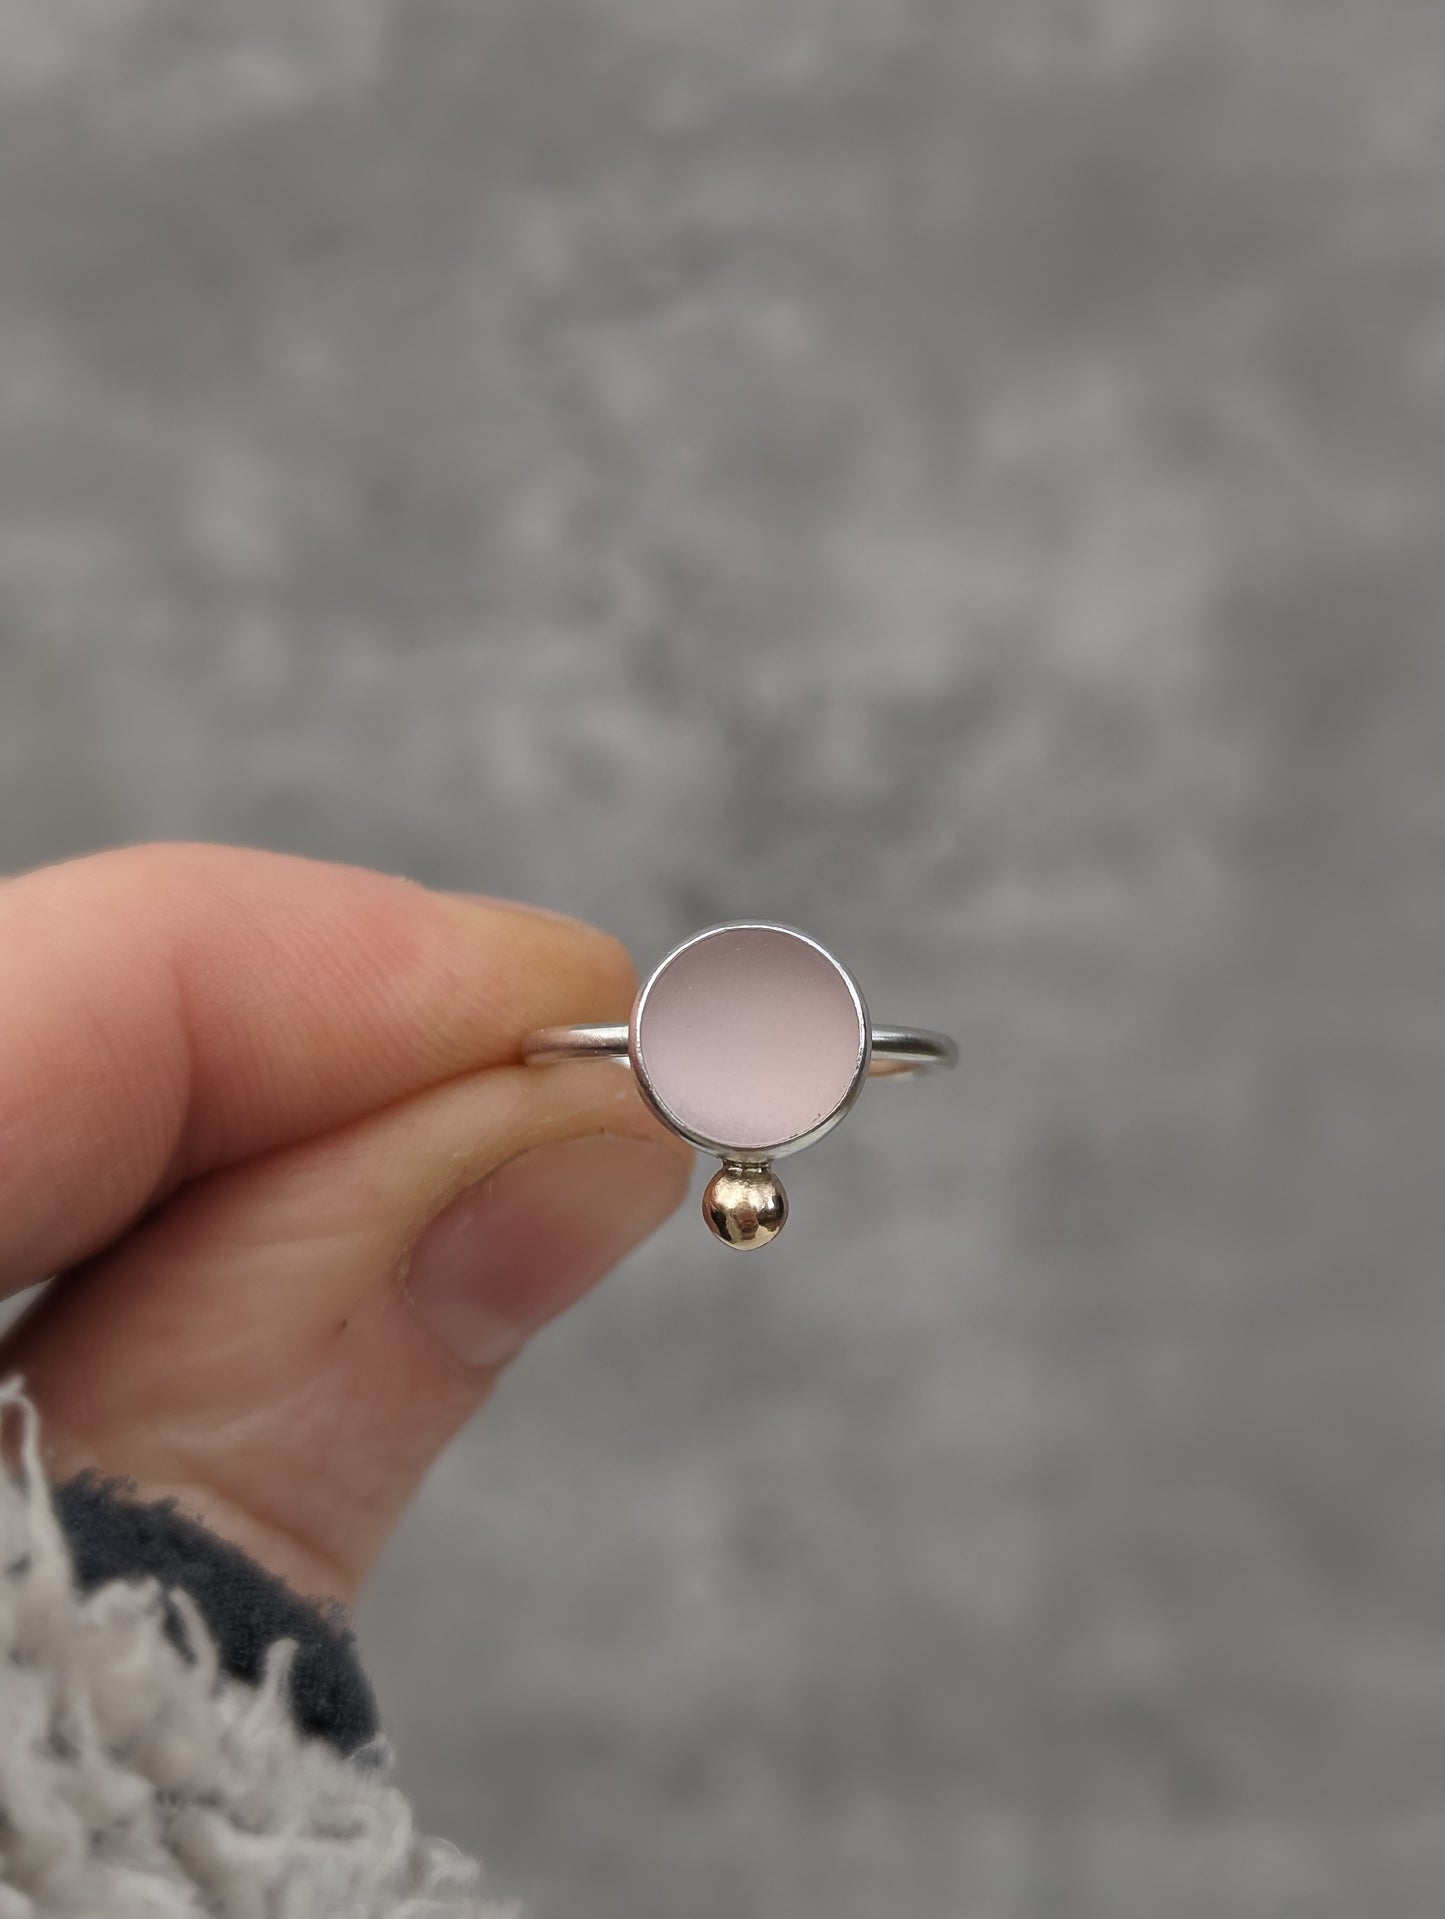 Blush pink seaglass ring with 9ct gold